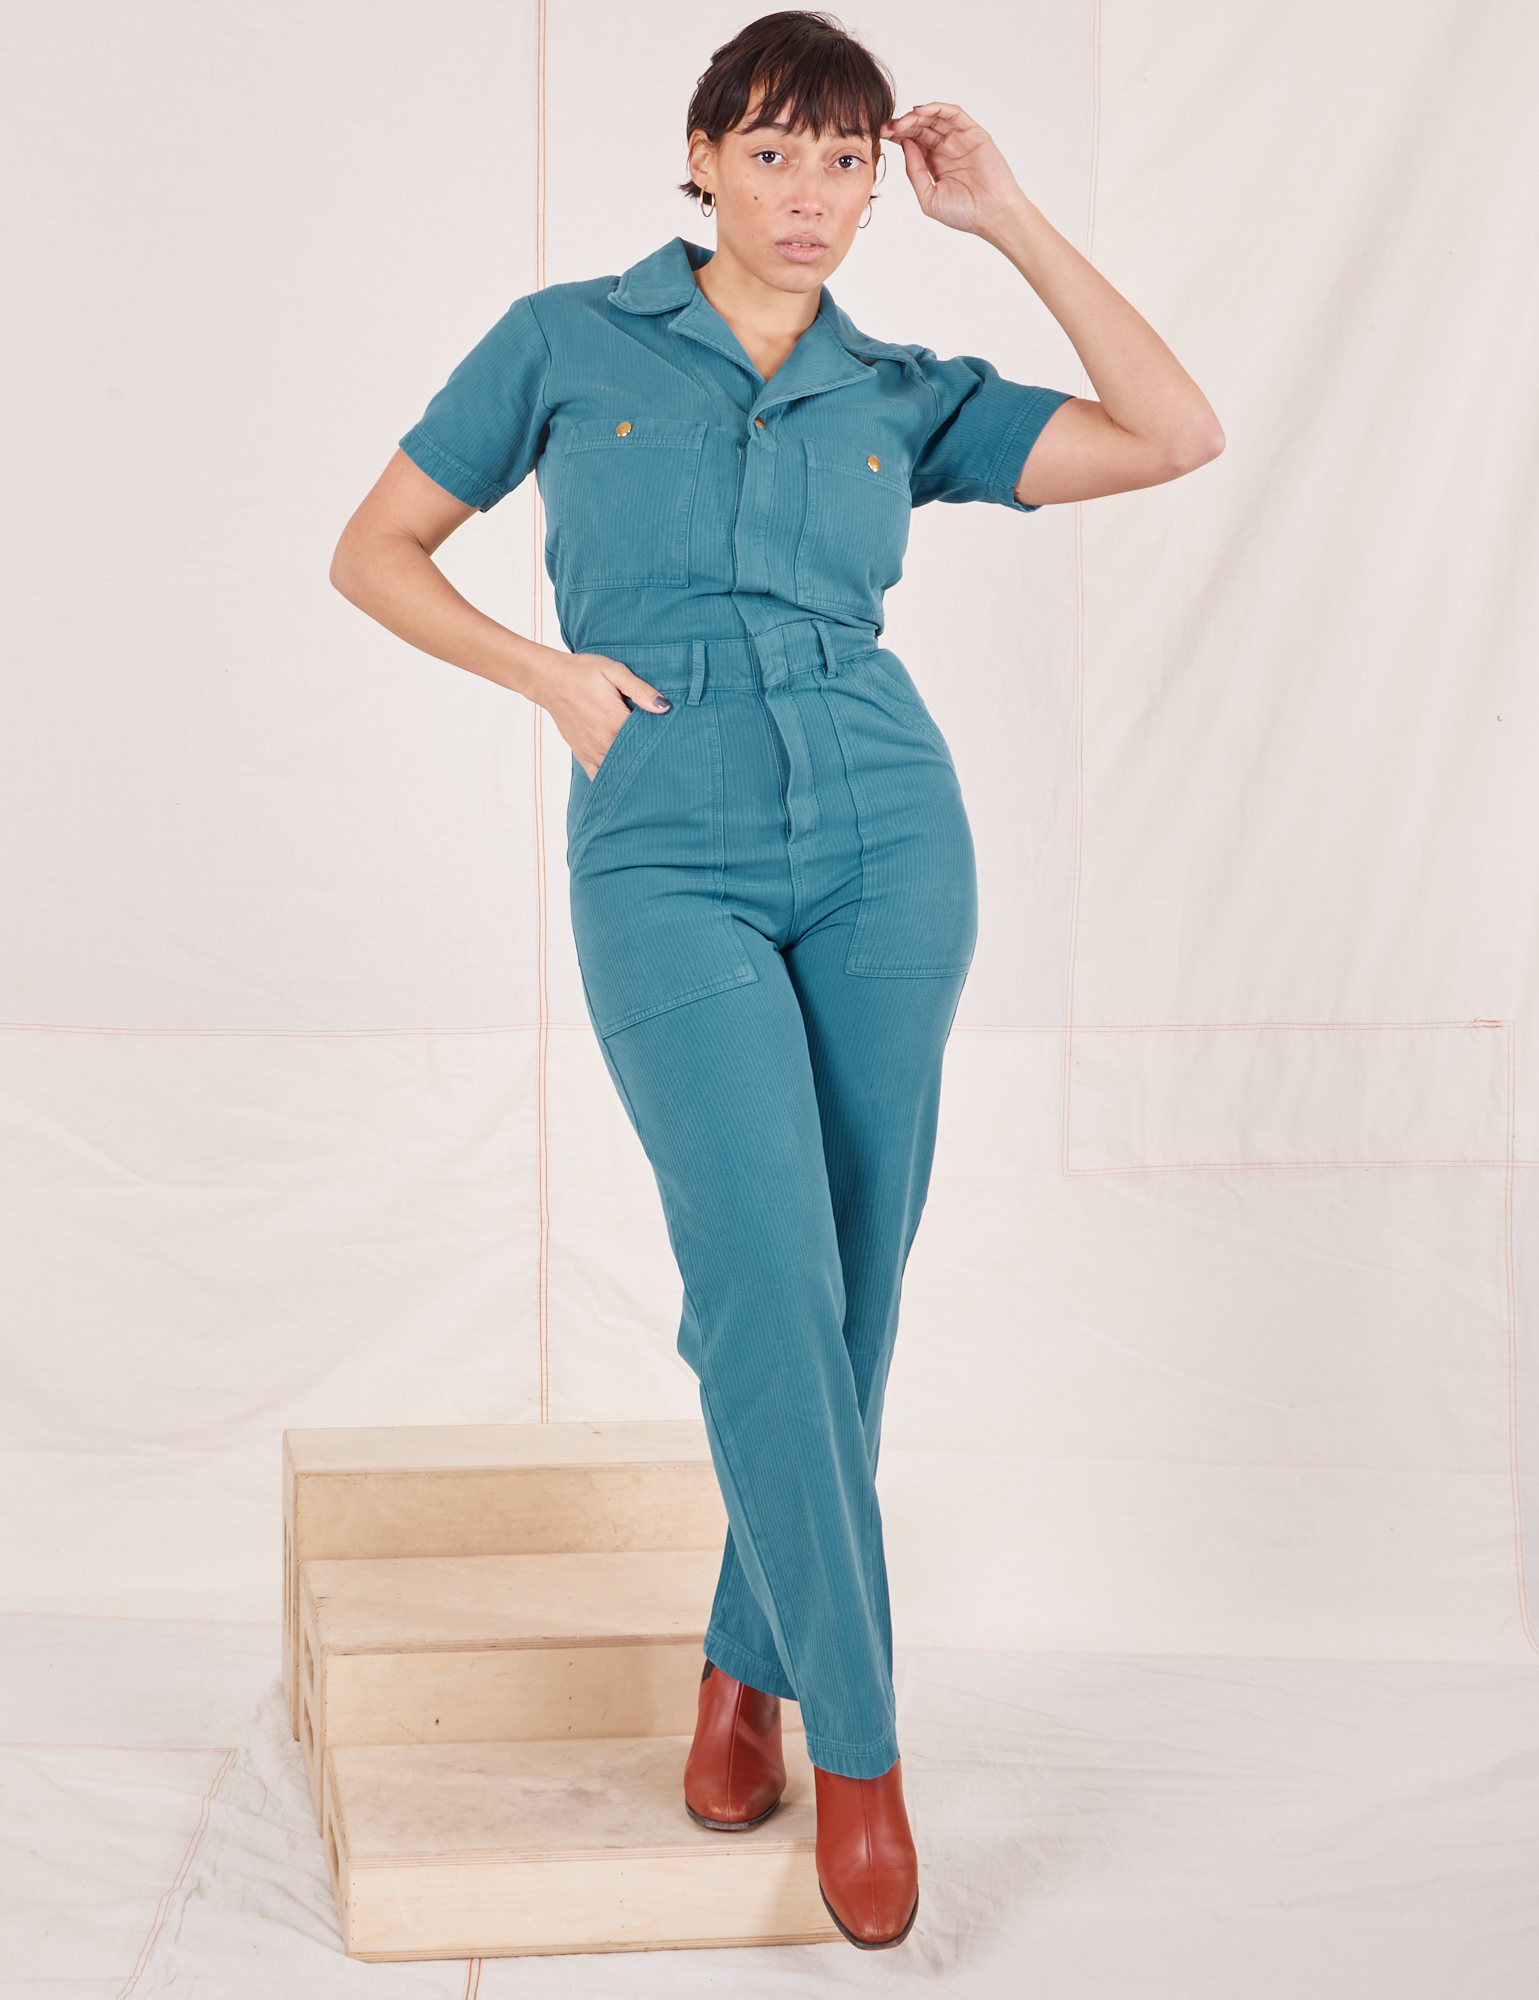 Tiara is 5&#39;4&quot; and wearing size S Heritage Short Sleeve Jumpsuit in Marine Blue